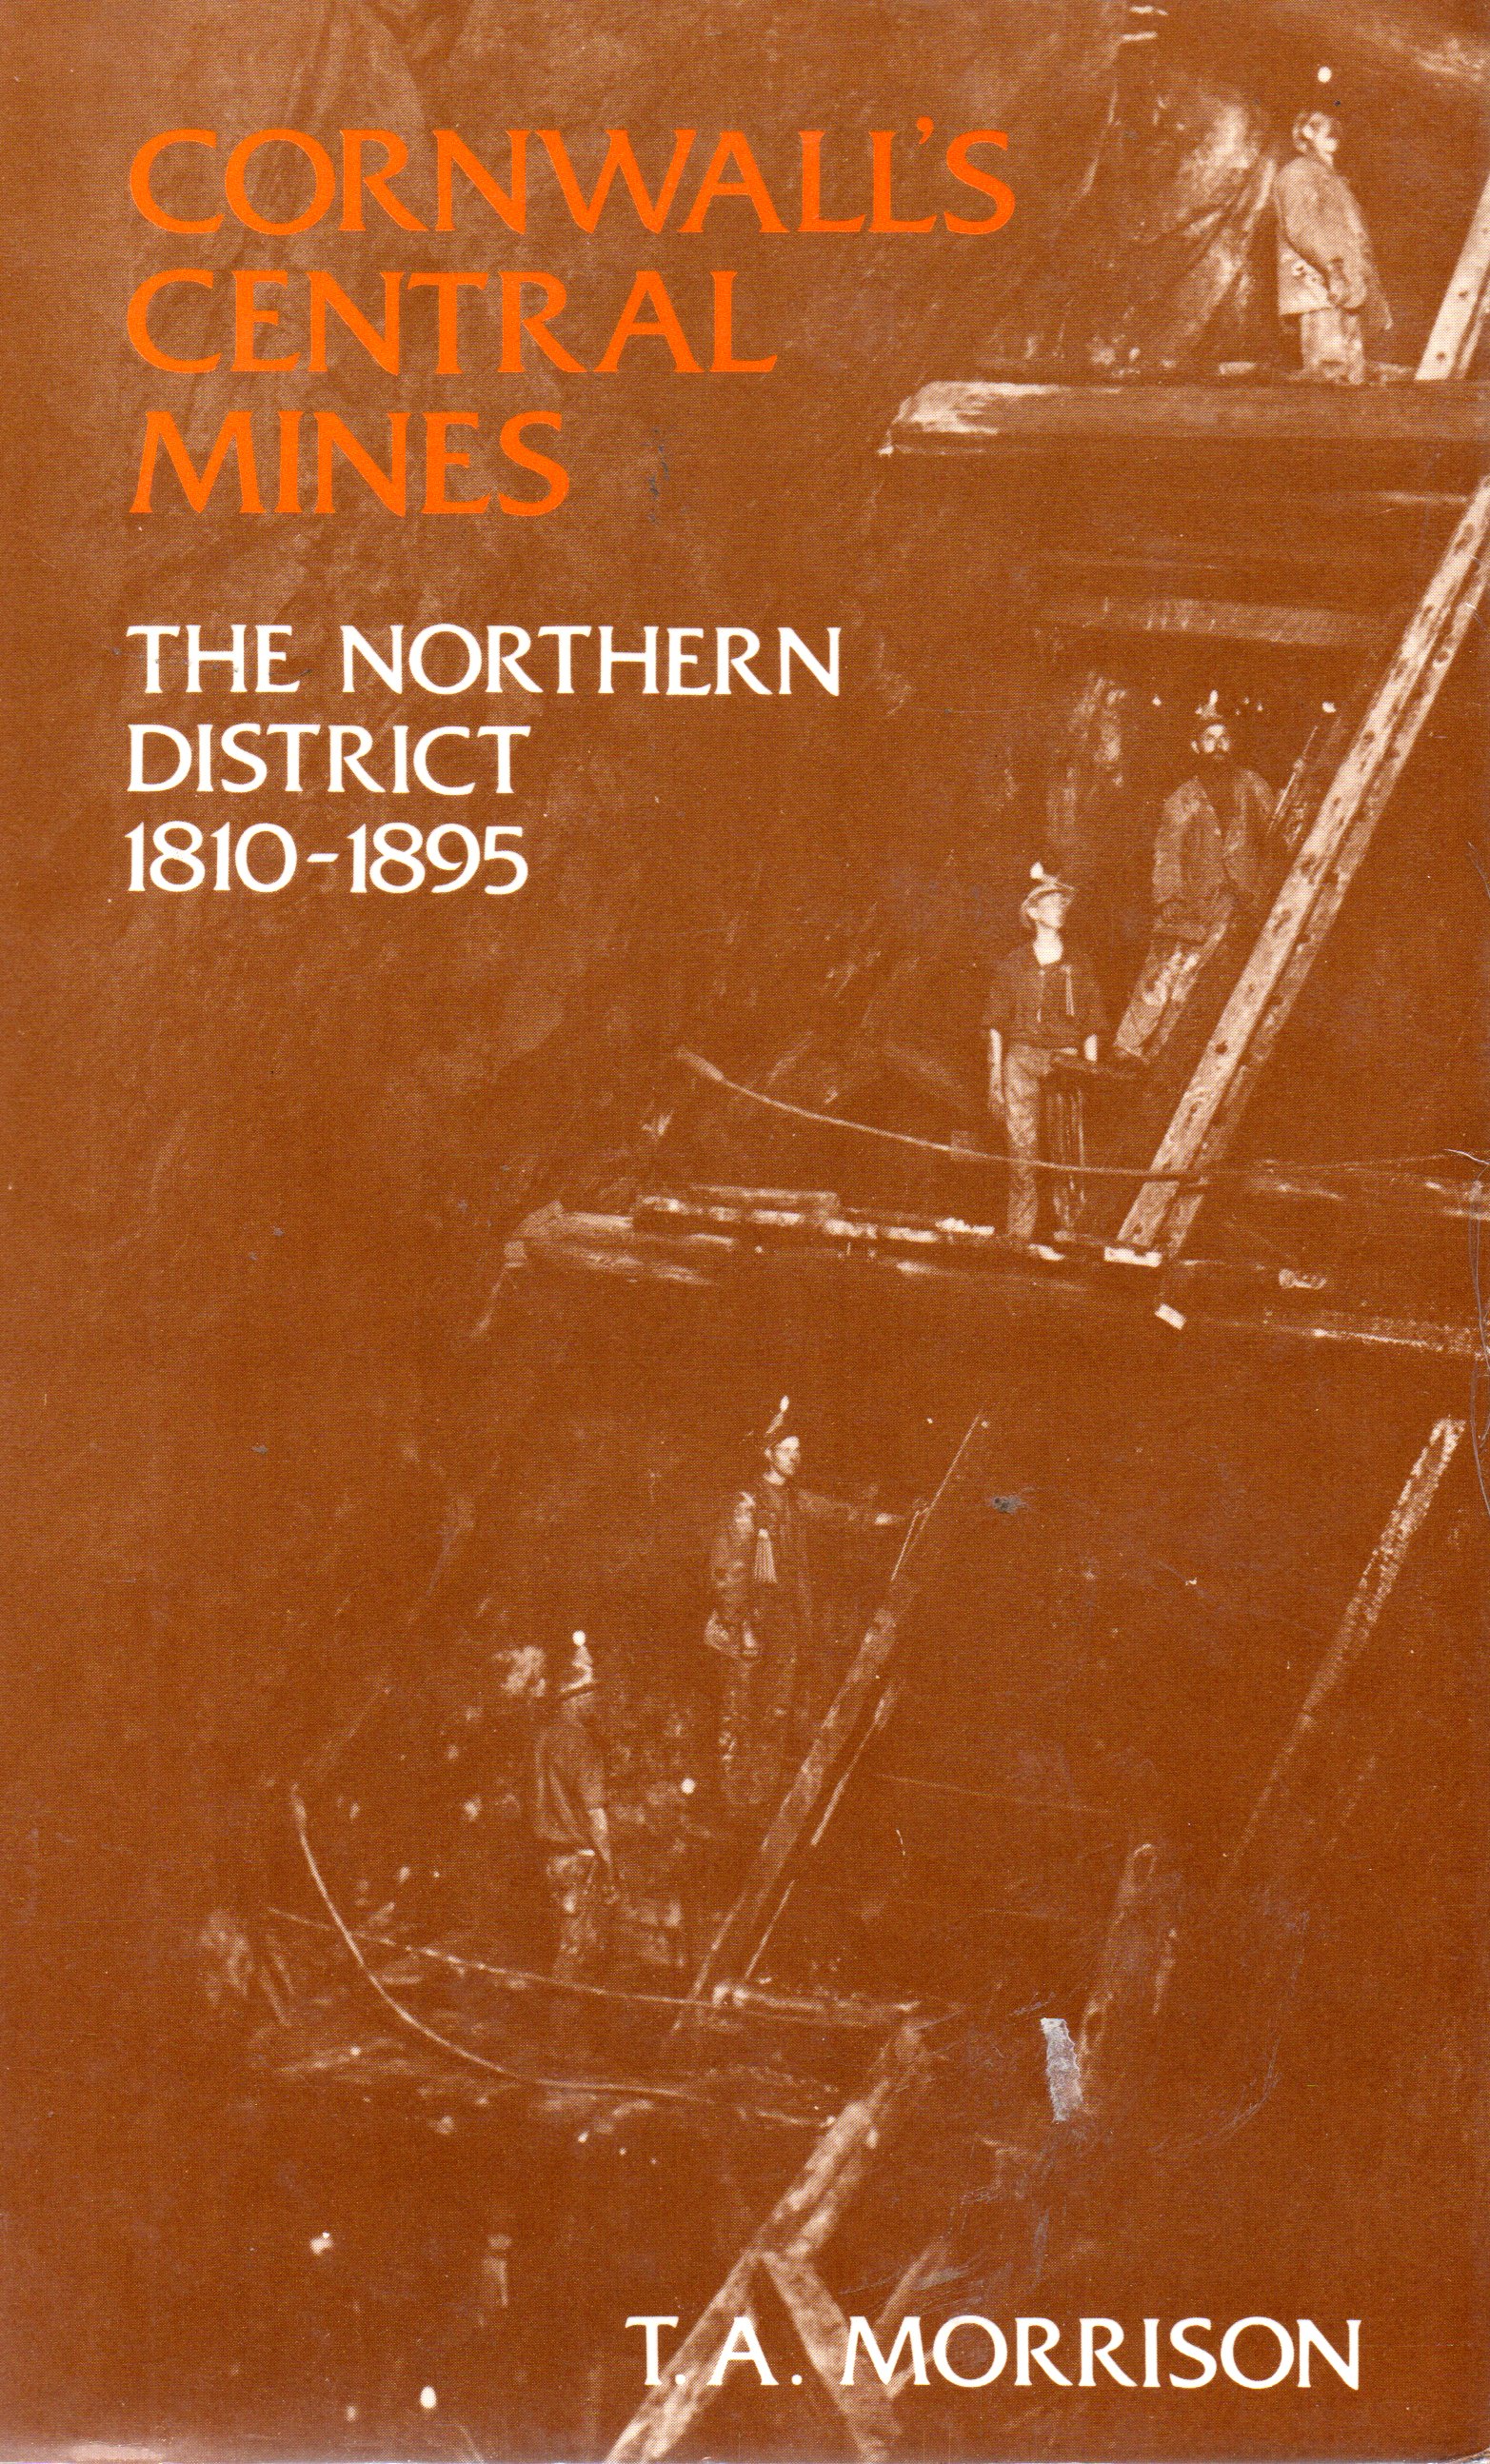 Cornwall's Central Mines - The Northern District 1810 - 1895